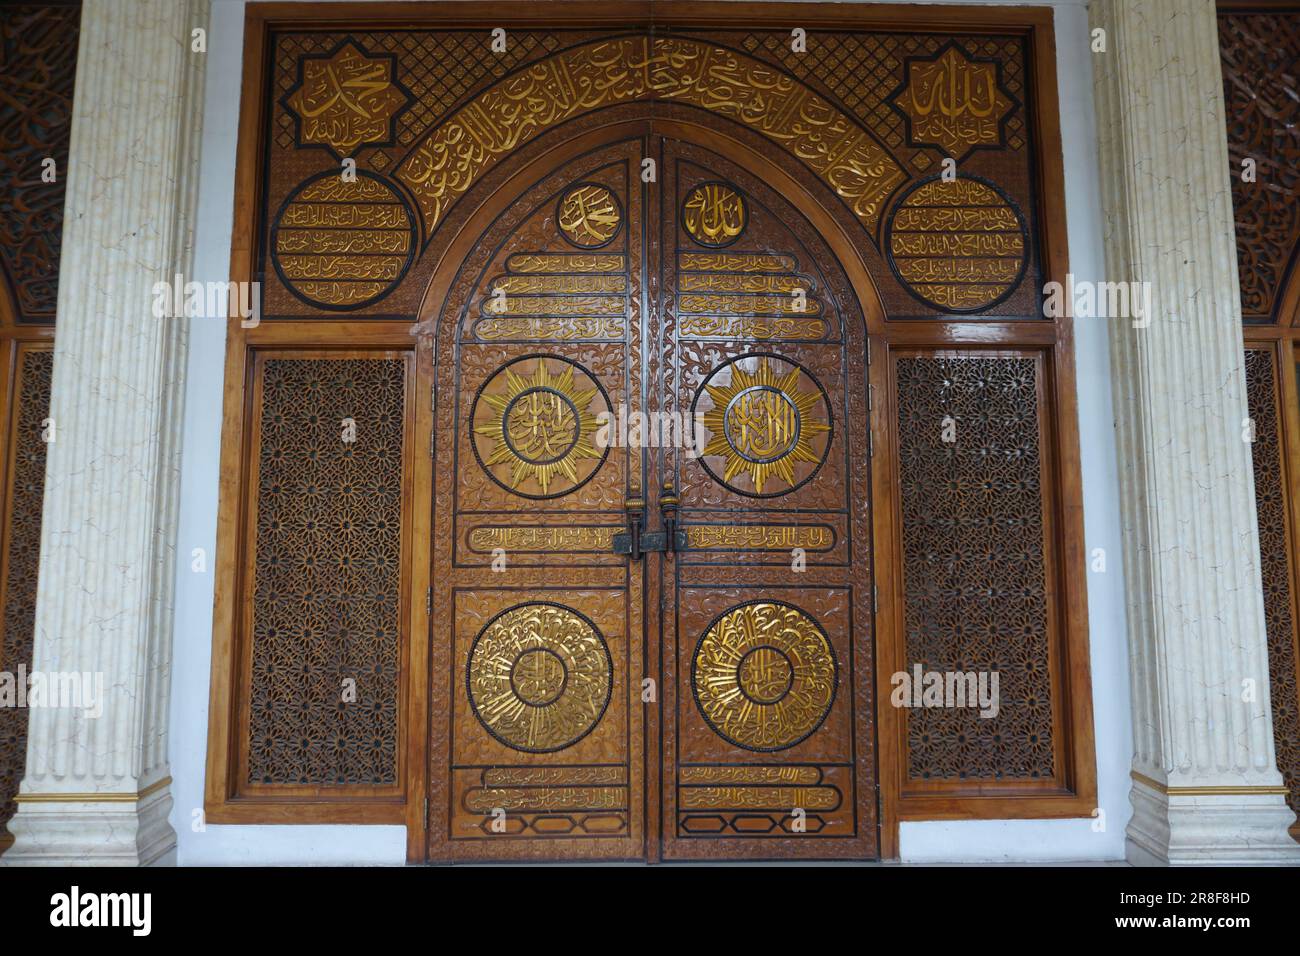 Very beautiful wood carving at the entrance of the mosque Stock Photo